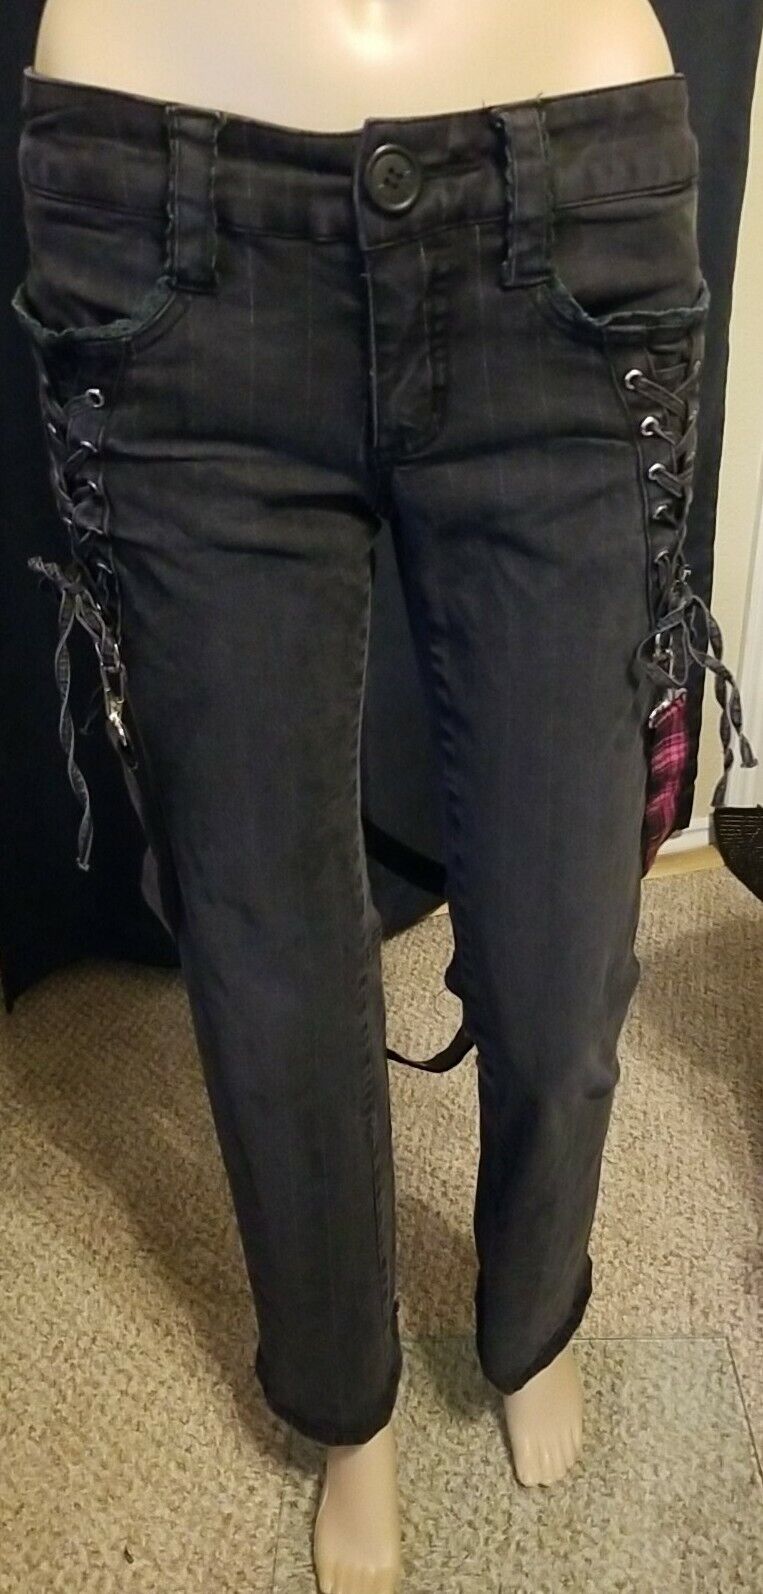 Hot Topic Tripp NYC Black Laced pants! 